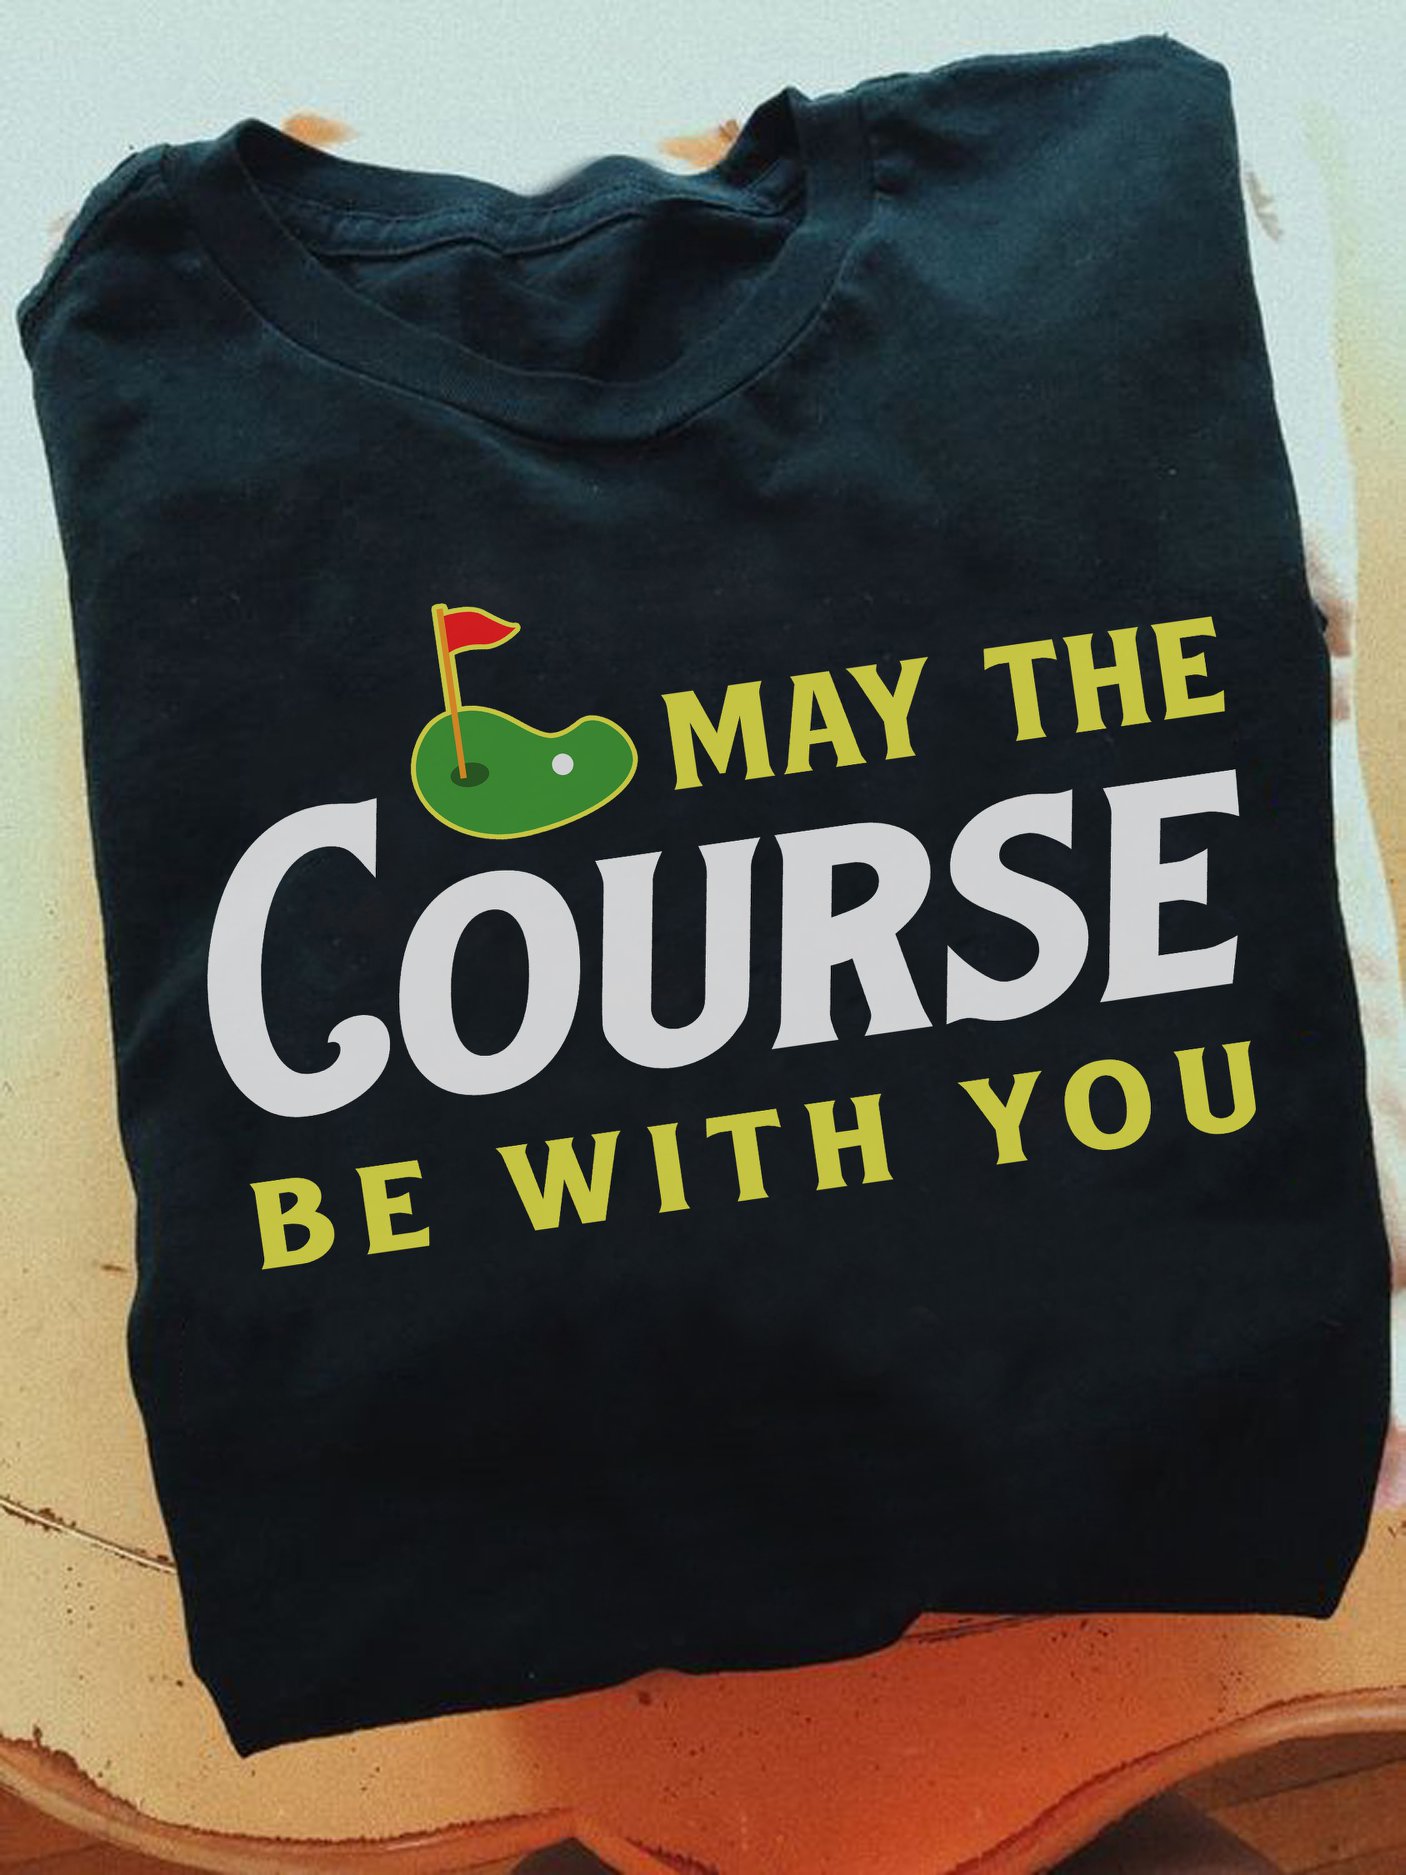 May the course be with you - Golf lover